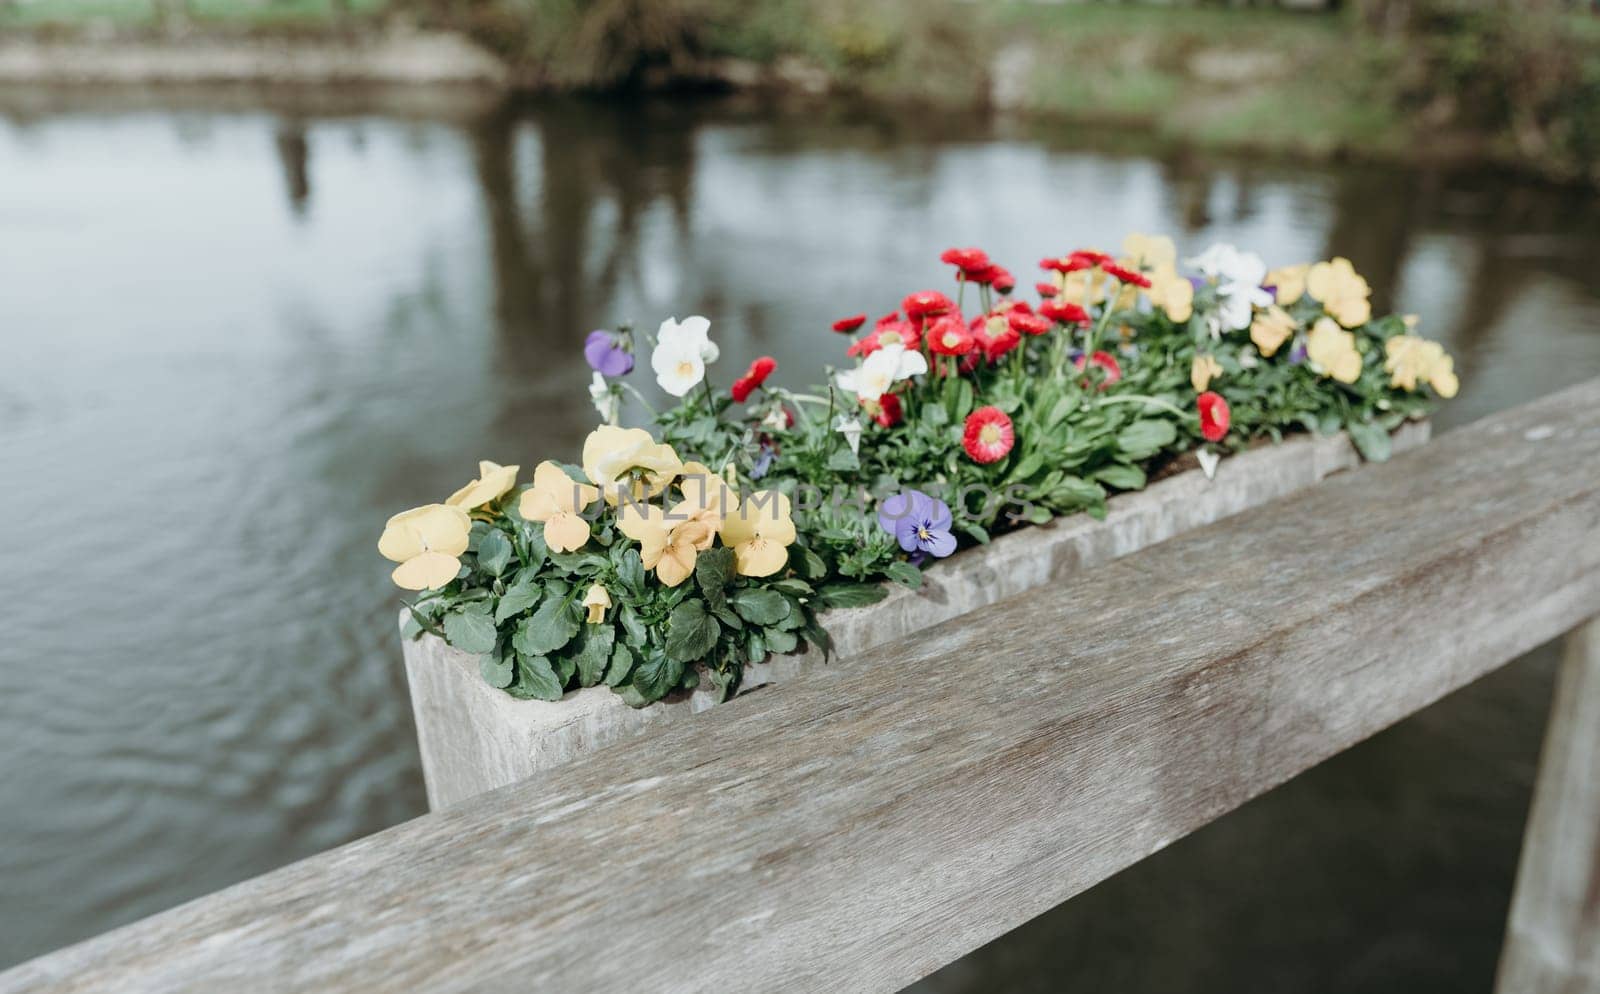 Street pansy flowers grow in a concrete pot that hangs on a wooden bridge railing against the backdrop of a washed-out river on a sunny spring day in a nature reserve, close-up side view.